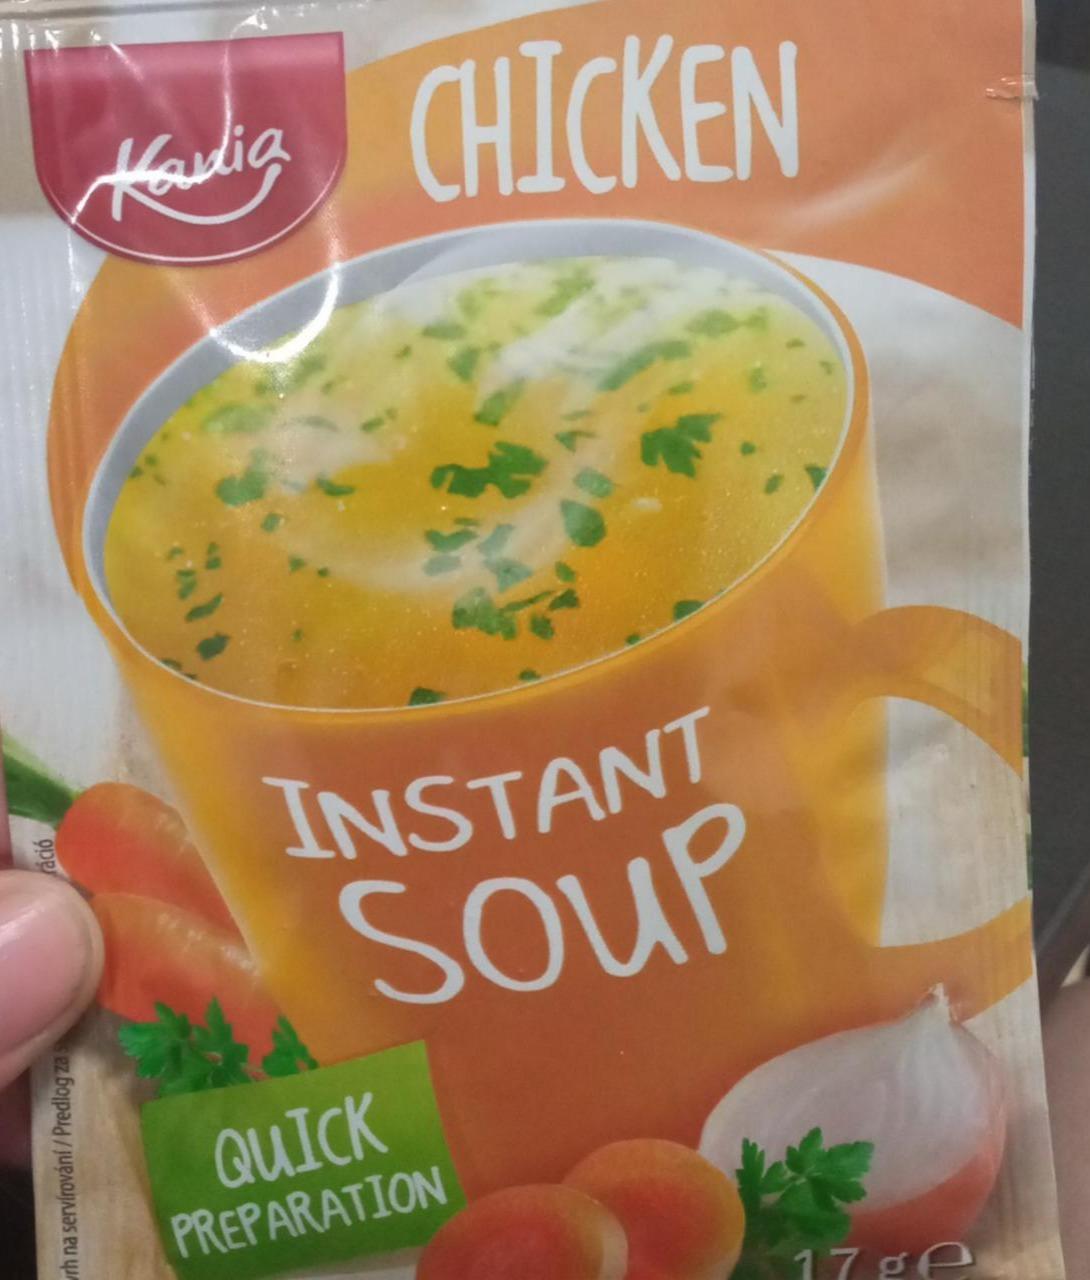 Фото - Instant soup chicken Kania